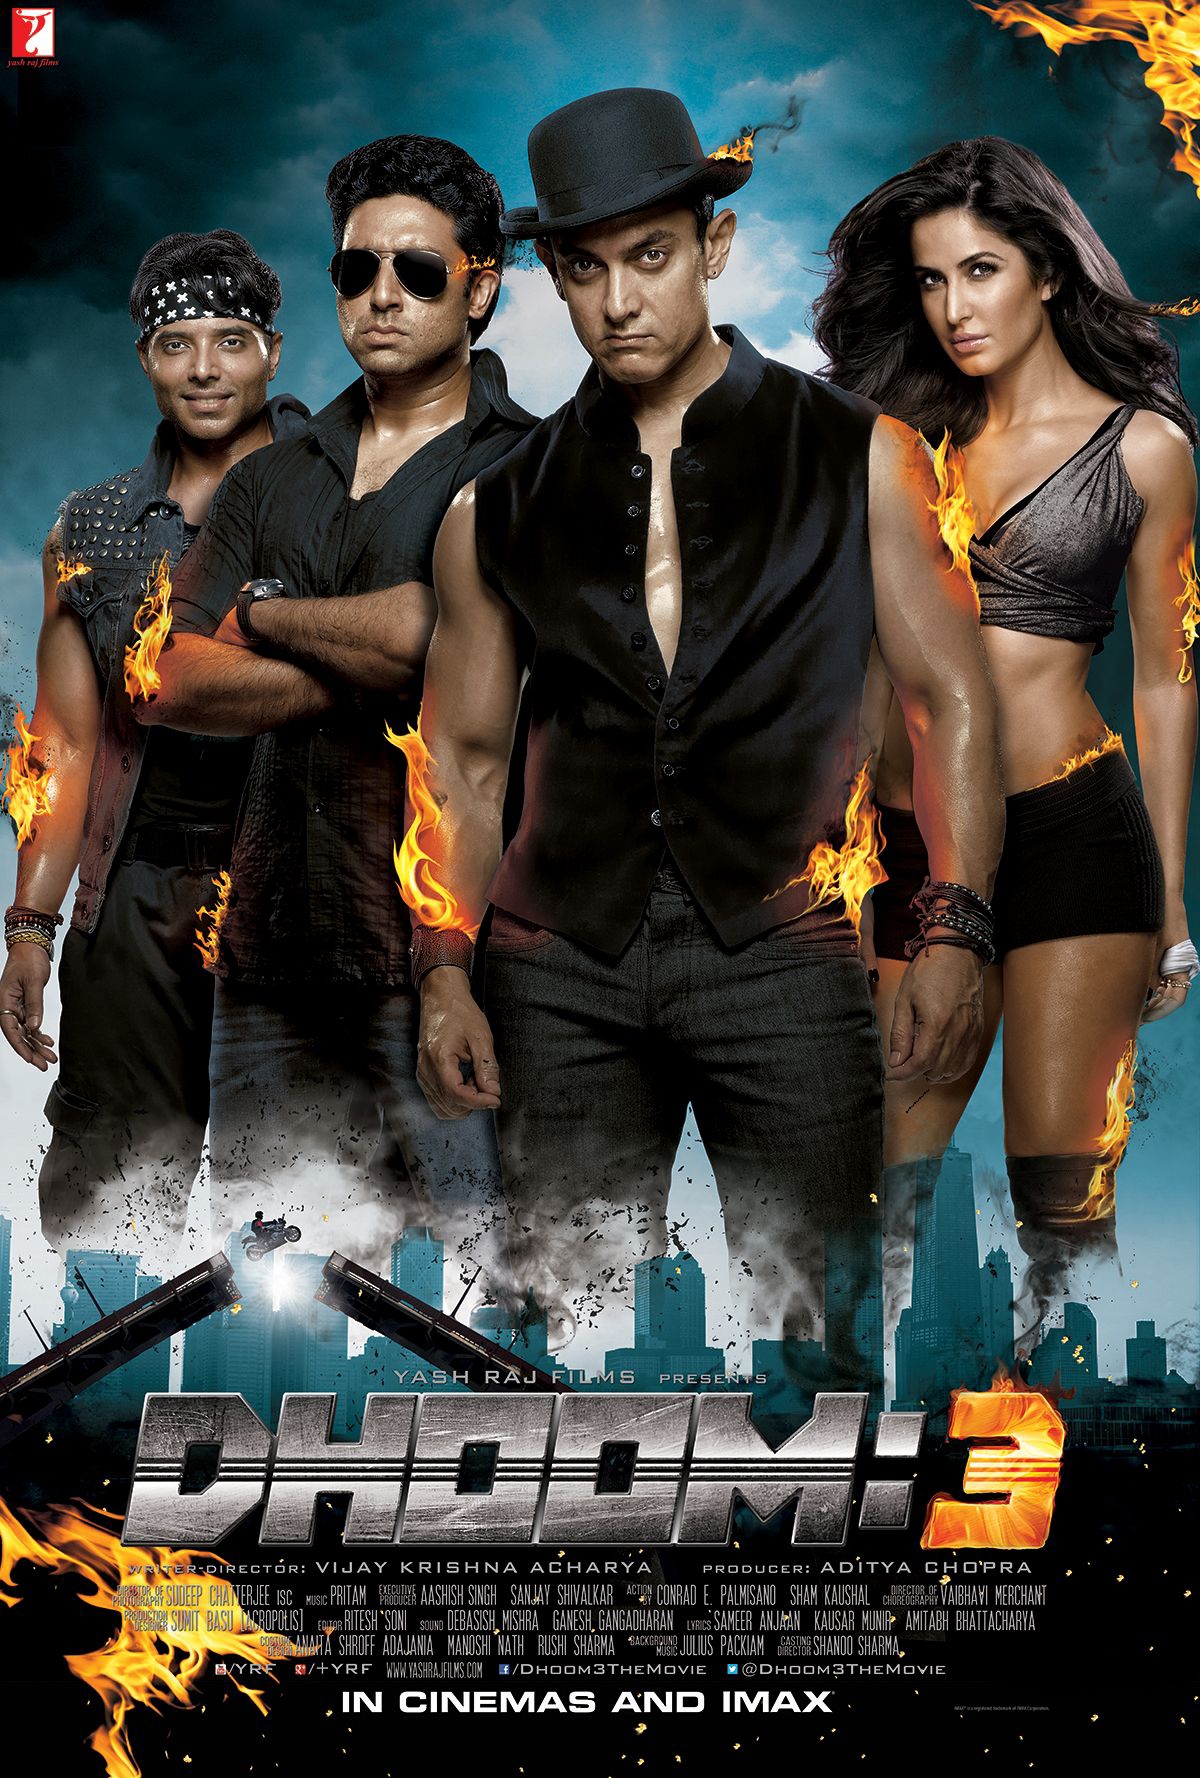 Hindi movie dhoom 3 download for pc